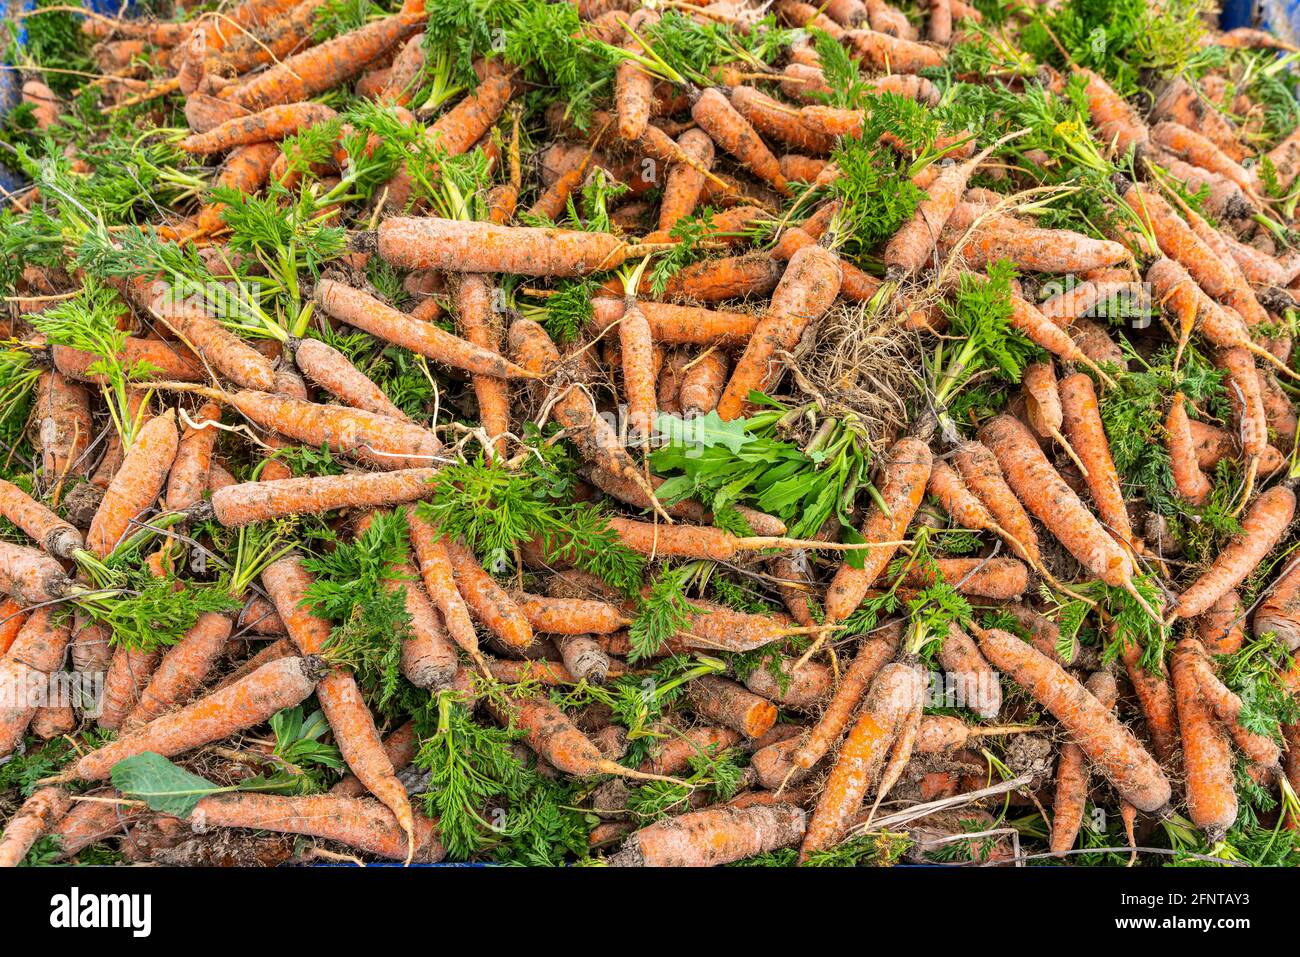 Carrots just picked from the ground and stowed in crates. Fucino, Abruzzo, Italy, Europe Stock Photo